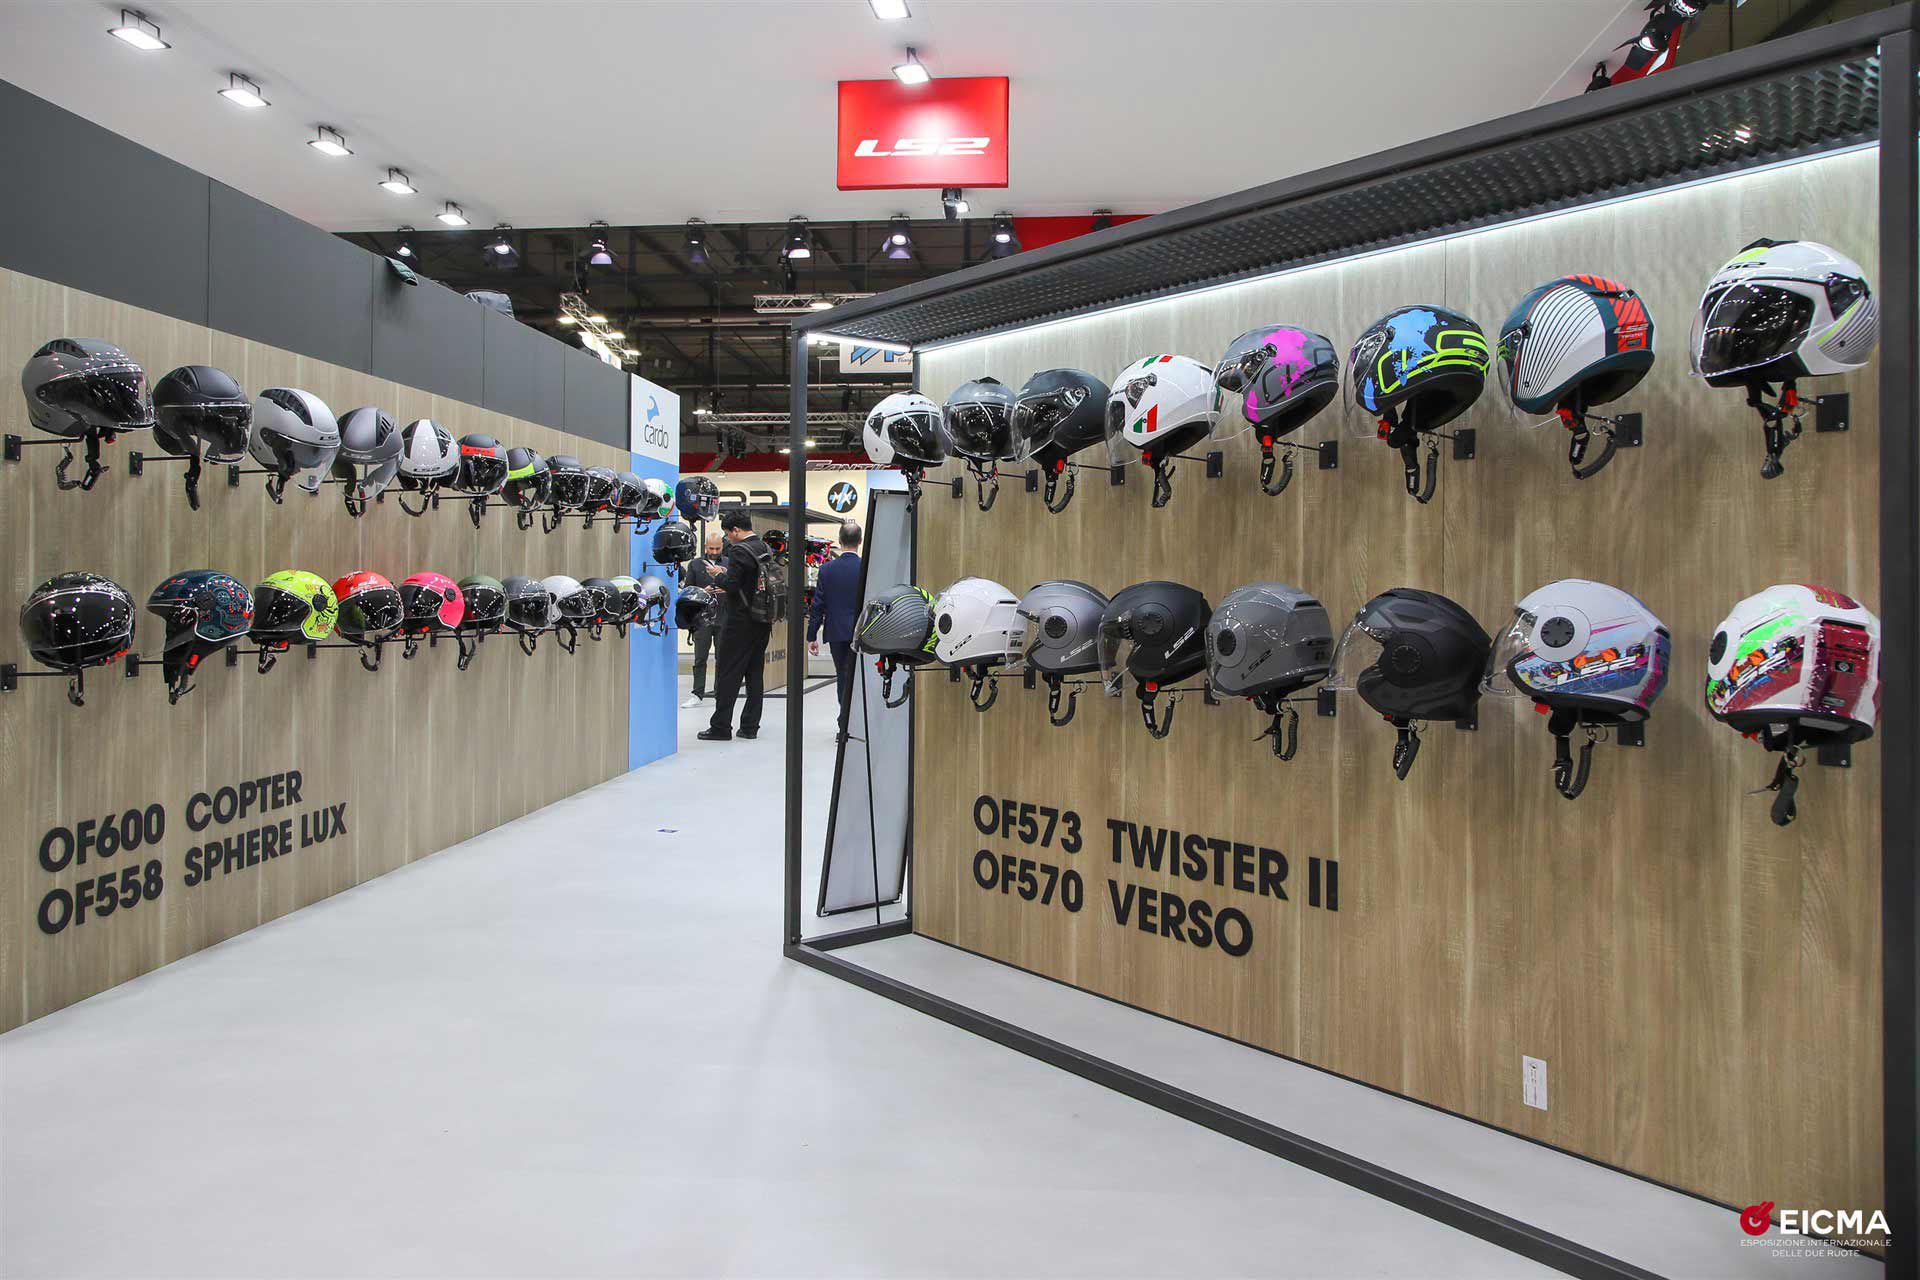 Just waiting for the right head: LS2 shows off its extensive line of helmets.